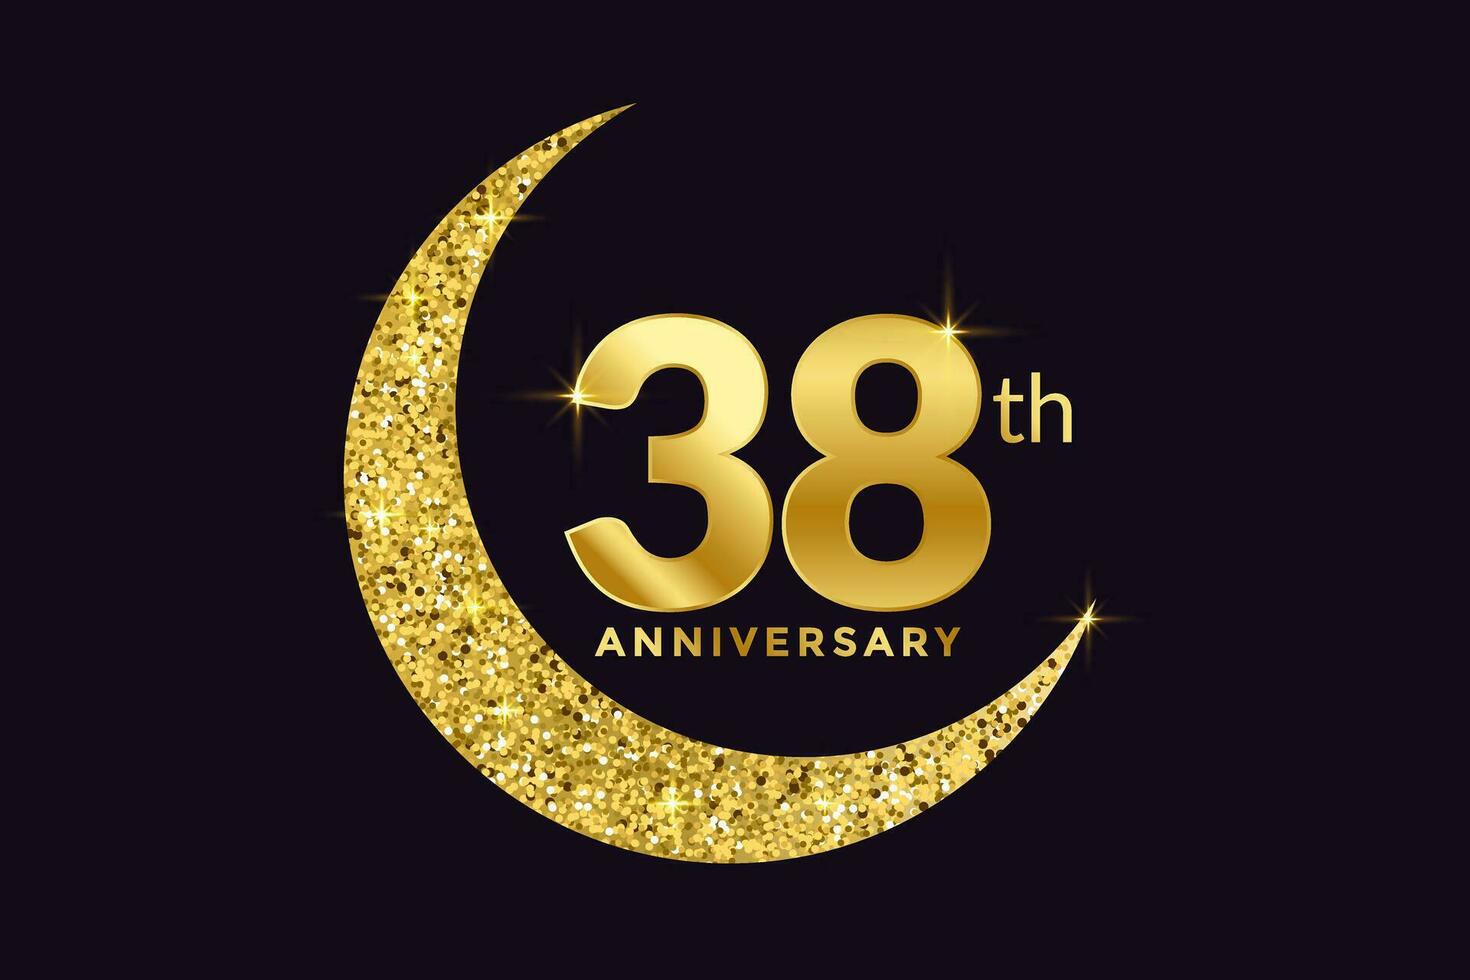 Thirty Eight Years Anniversary Celebration Golden Emblem in Black Background. Number 38 Luxury Style Banner Isolated Vector. vector